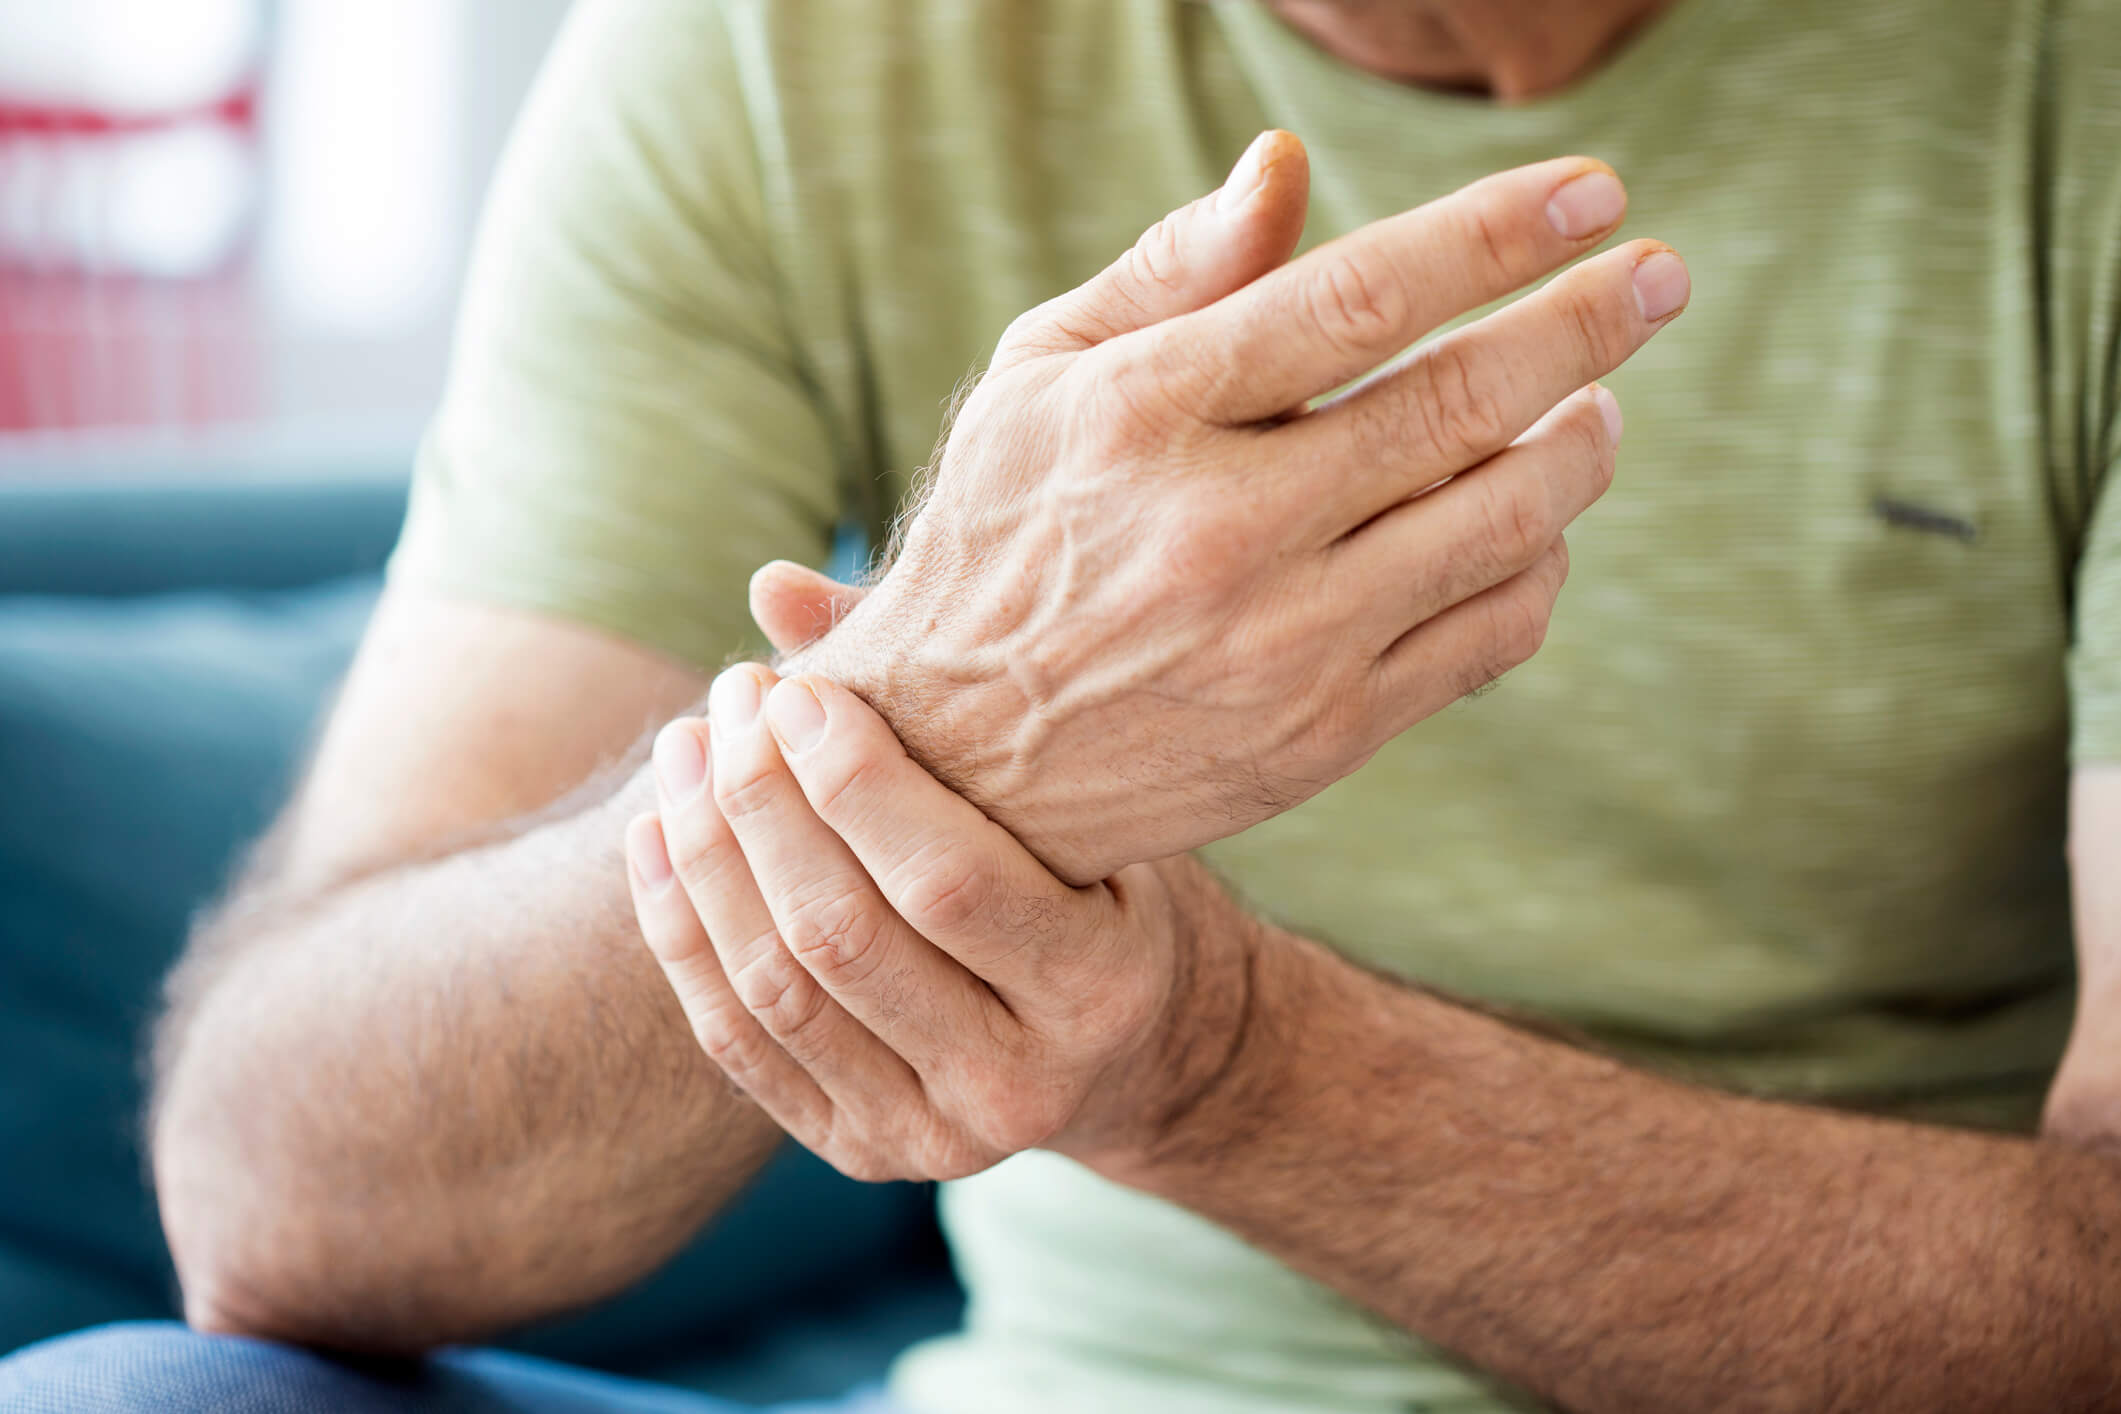 Carpel tunnel syndrome causes pain and numbness in the wrist, fingers and thumbs.